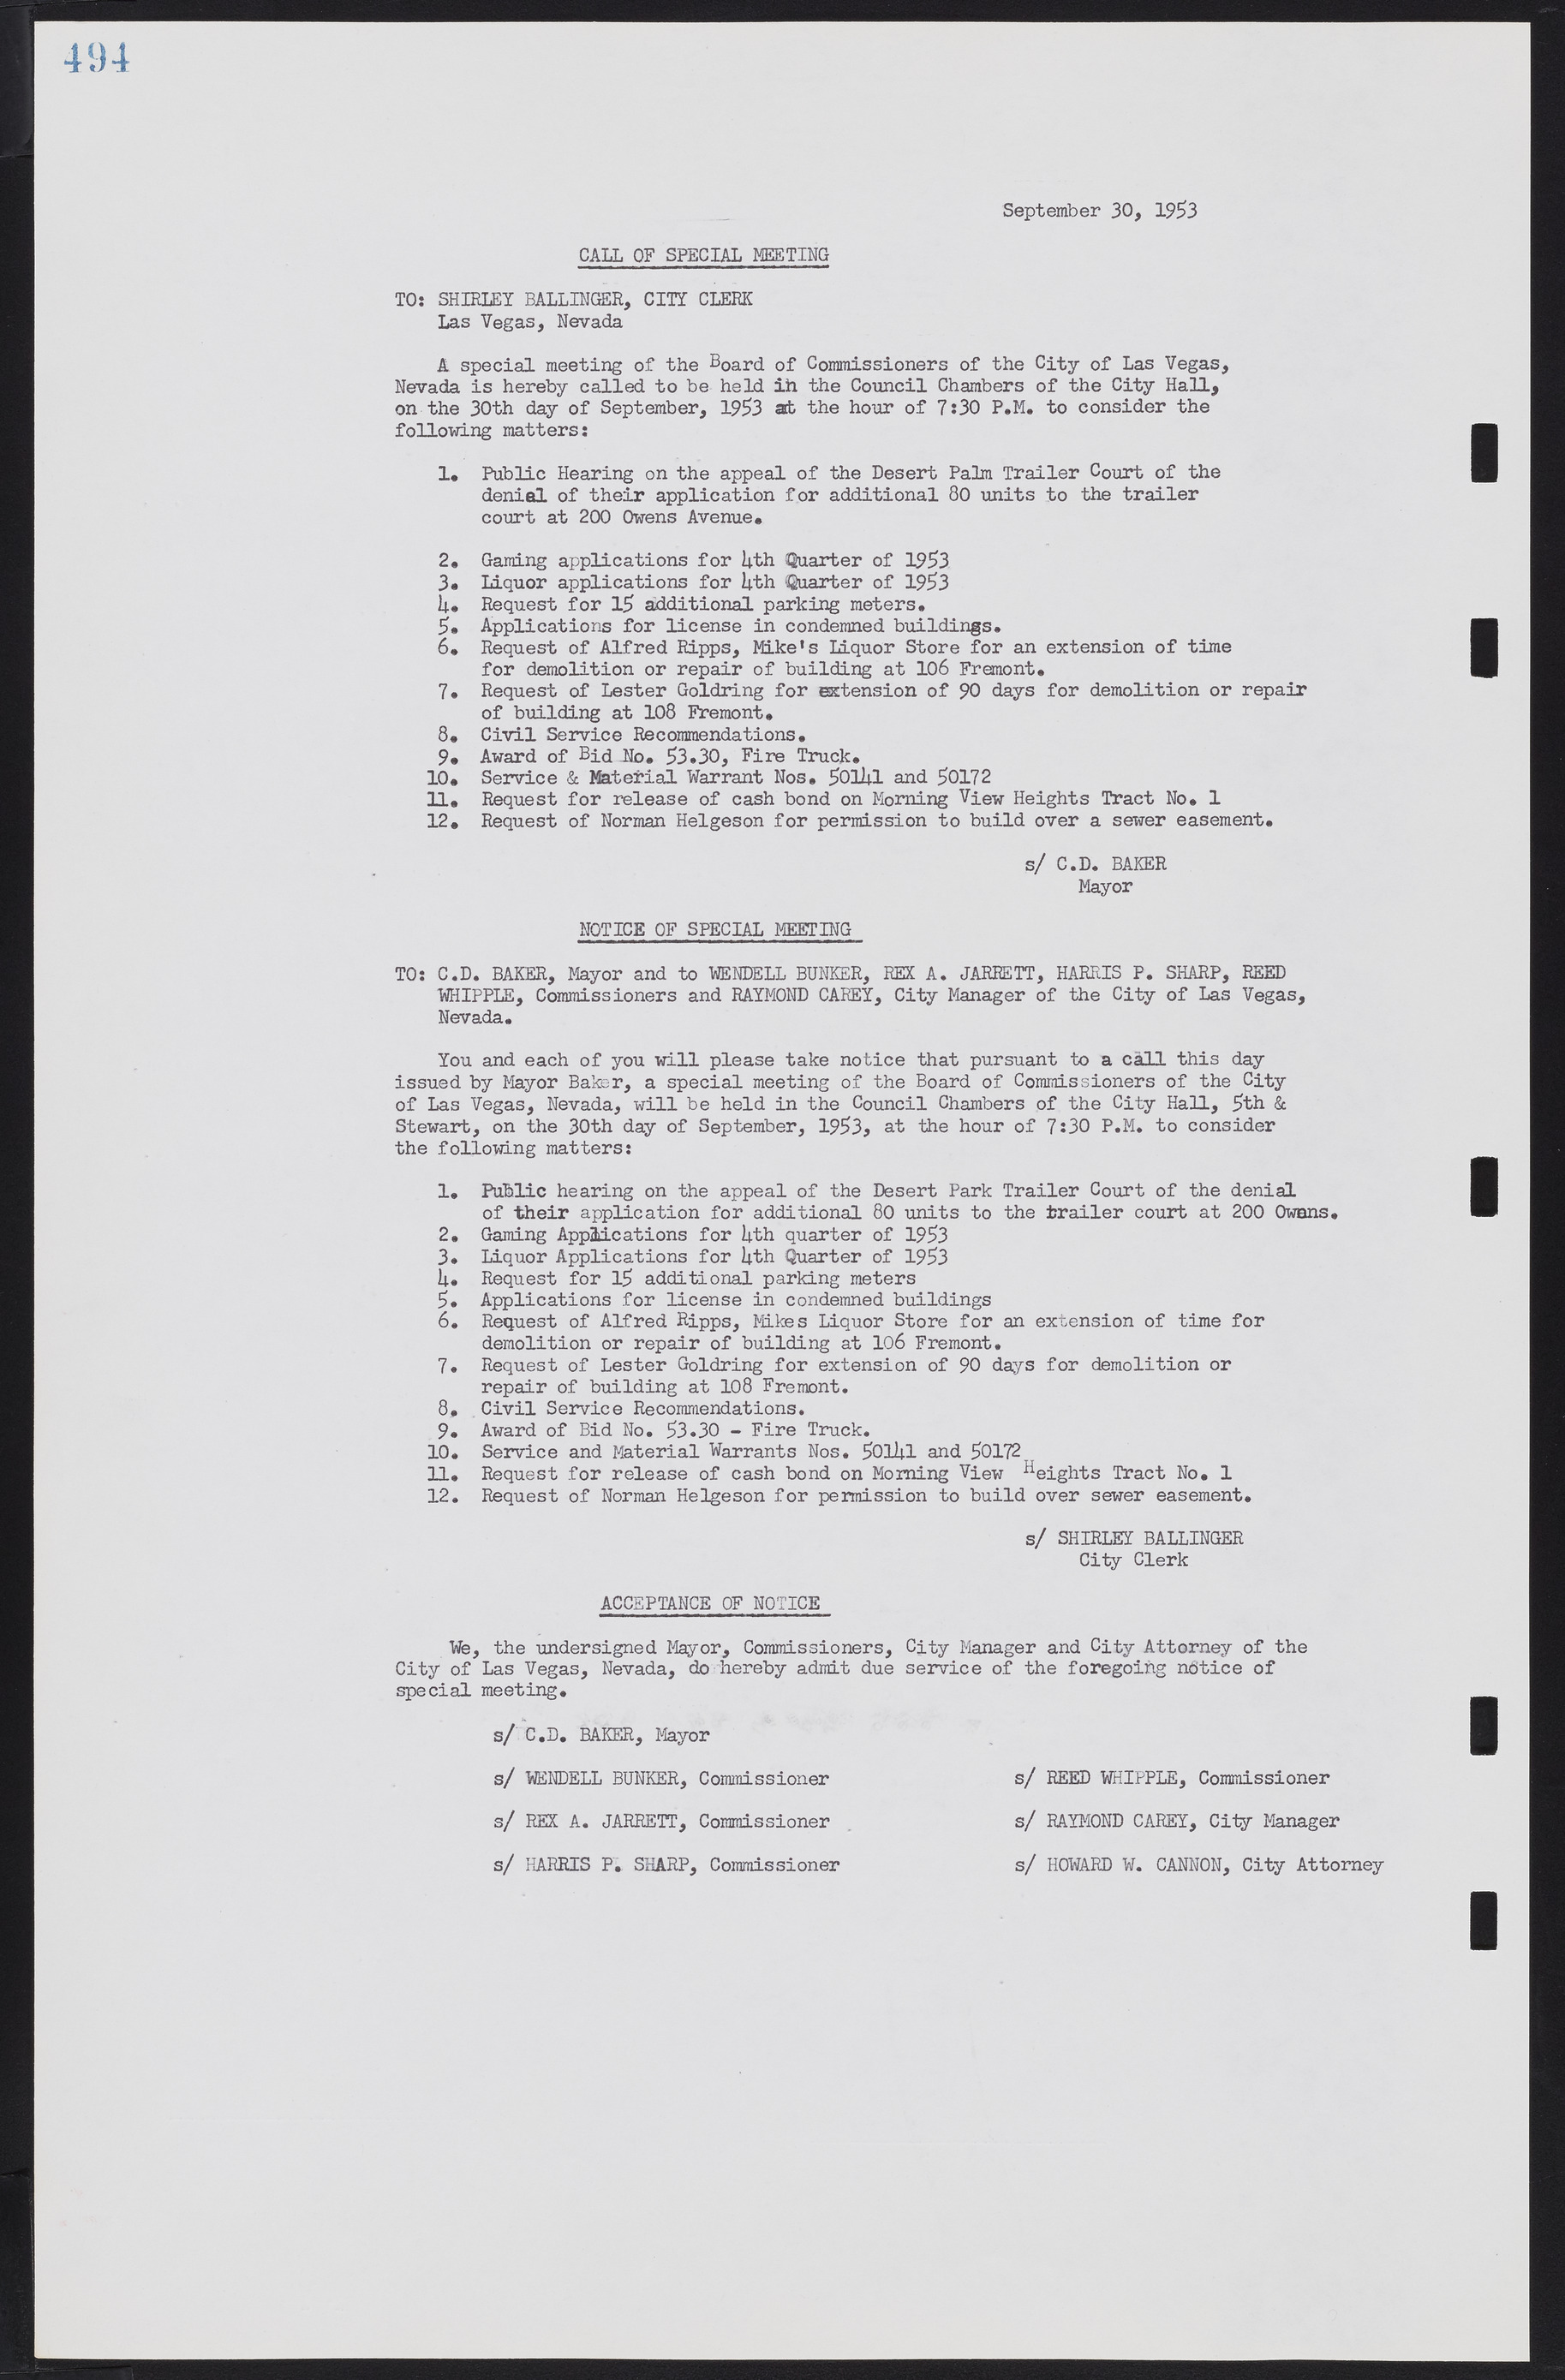 Las Vegas City Commission Minutes, May 26, 1952 to February 17, 1954, lvc000008-524